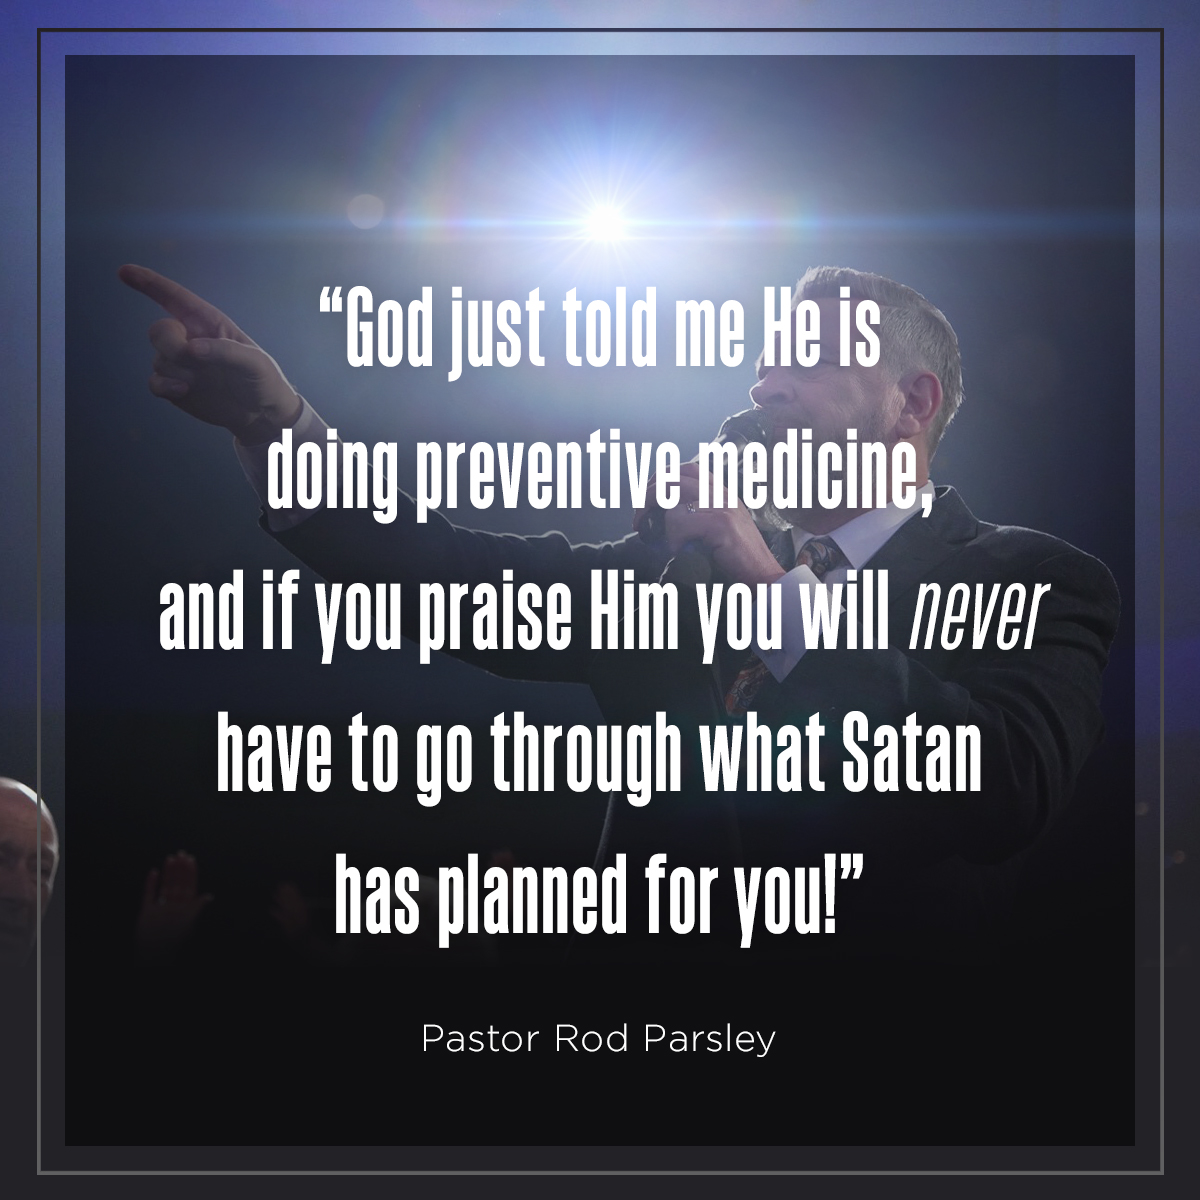 “God just told me He is doing preventive medicine, and if you praise Him you will never have to go through what Satan has planned for you!” – Pastor Rod Parsley